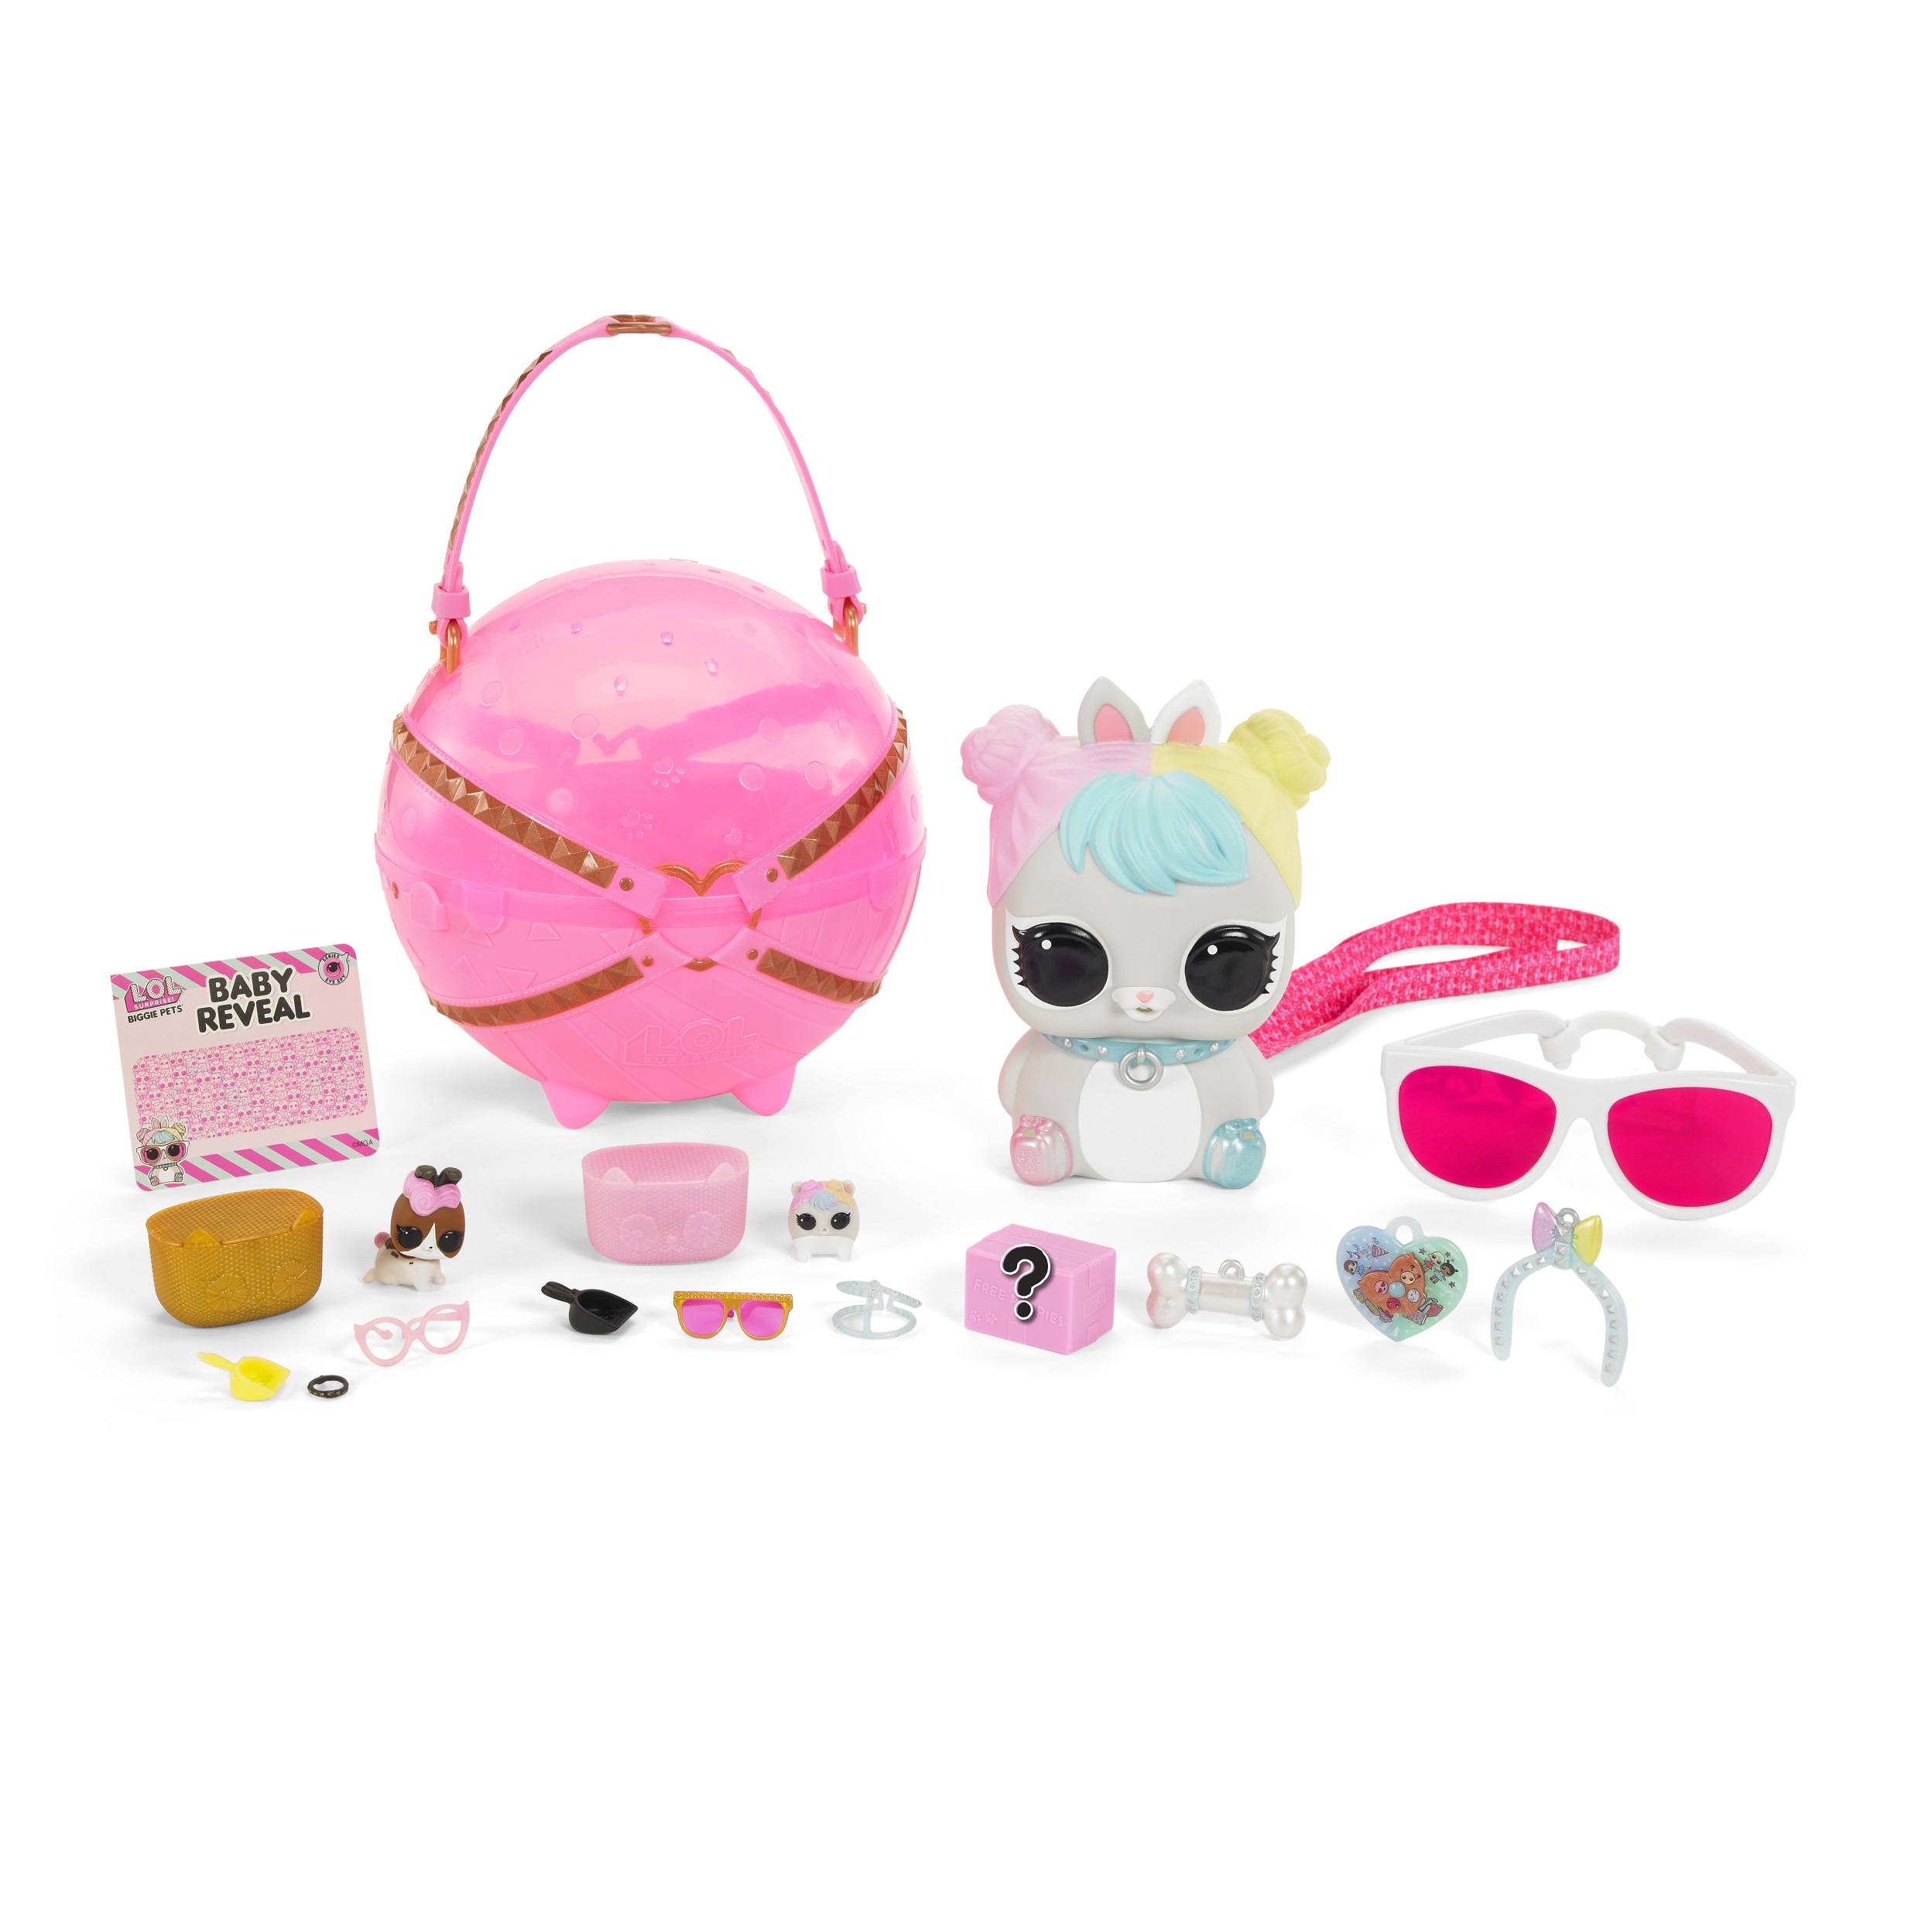 LOL Surprise Biggie Pets- Hop Hop Mini Backpack & Accessories, Great Gift for Kids Ages 4 5 6+ - image 1 of 5